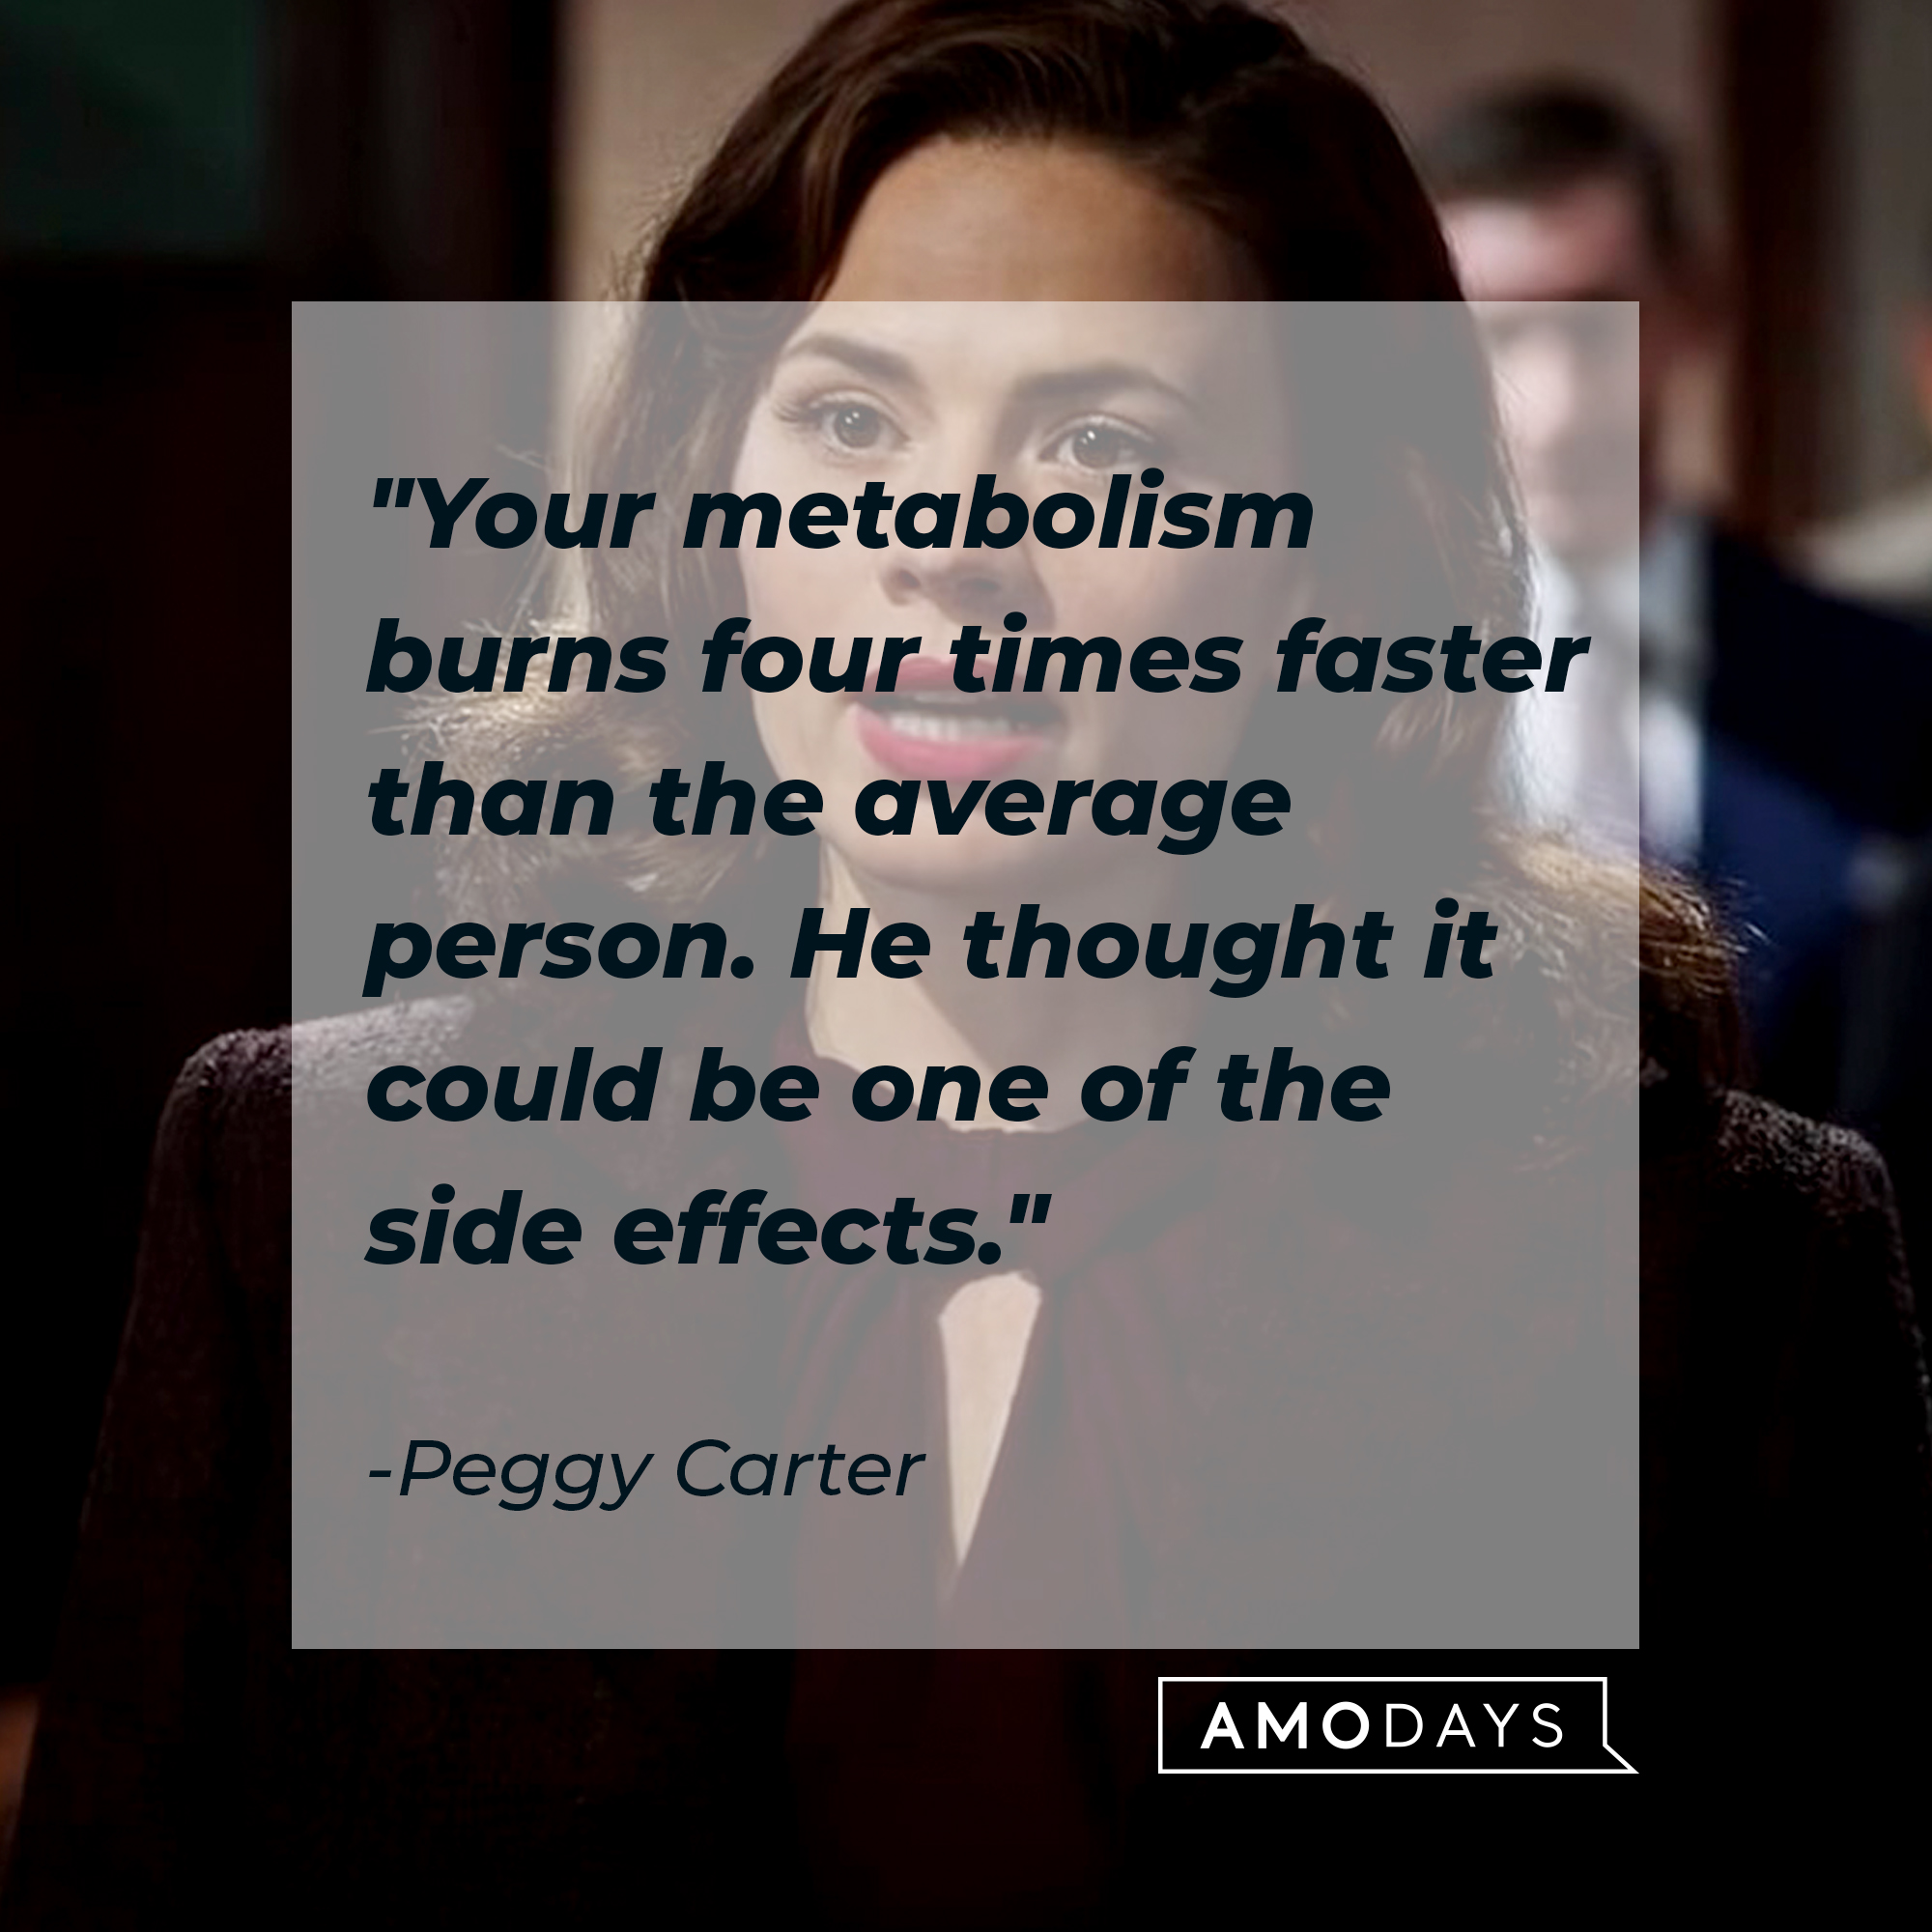 Peggy Carter's quote: "Your metabolism burns four times faster than the average person. He thought it could be one of the side effects." | Source: Facebook.com/marvelstudios